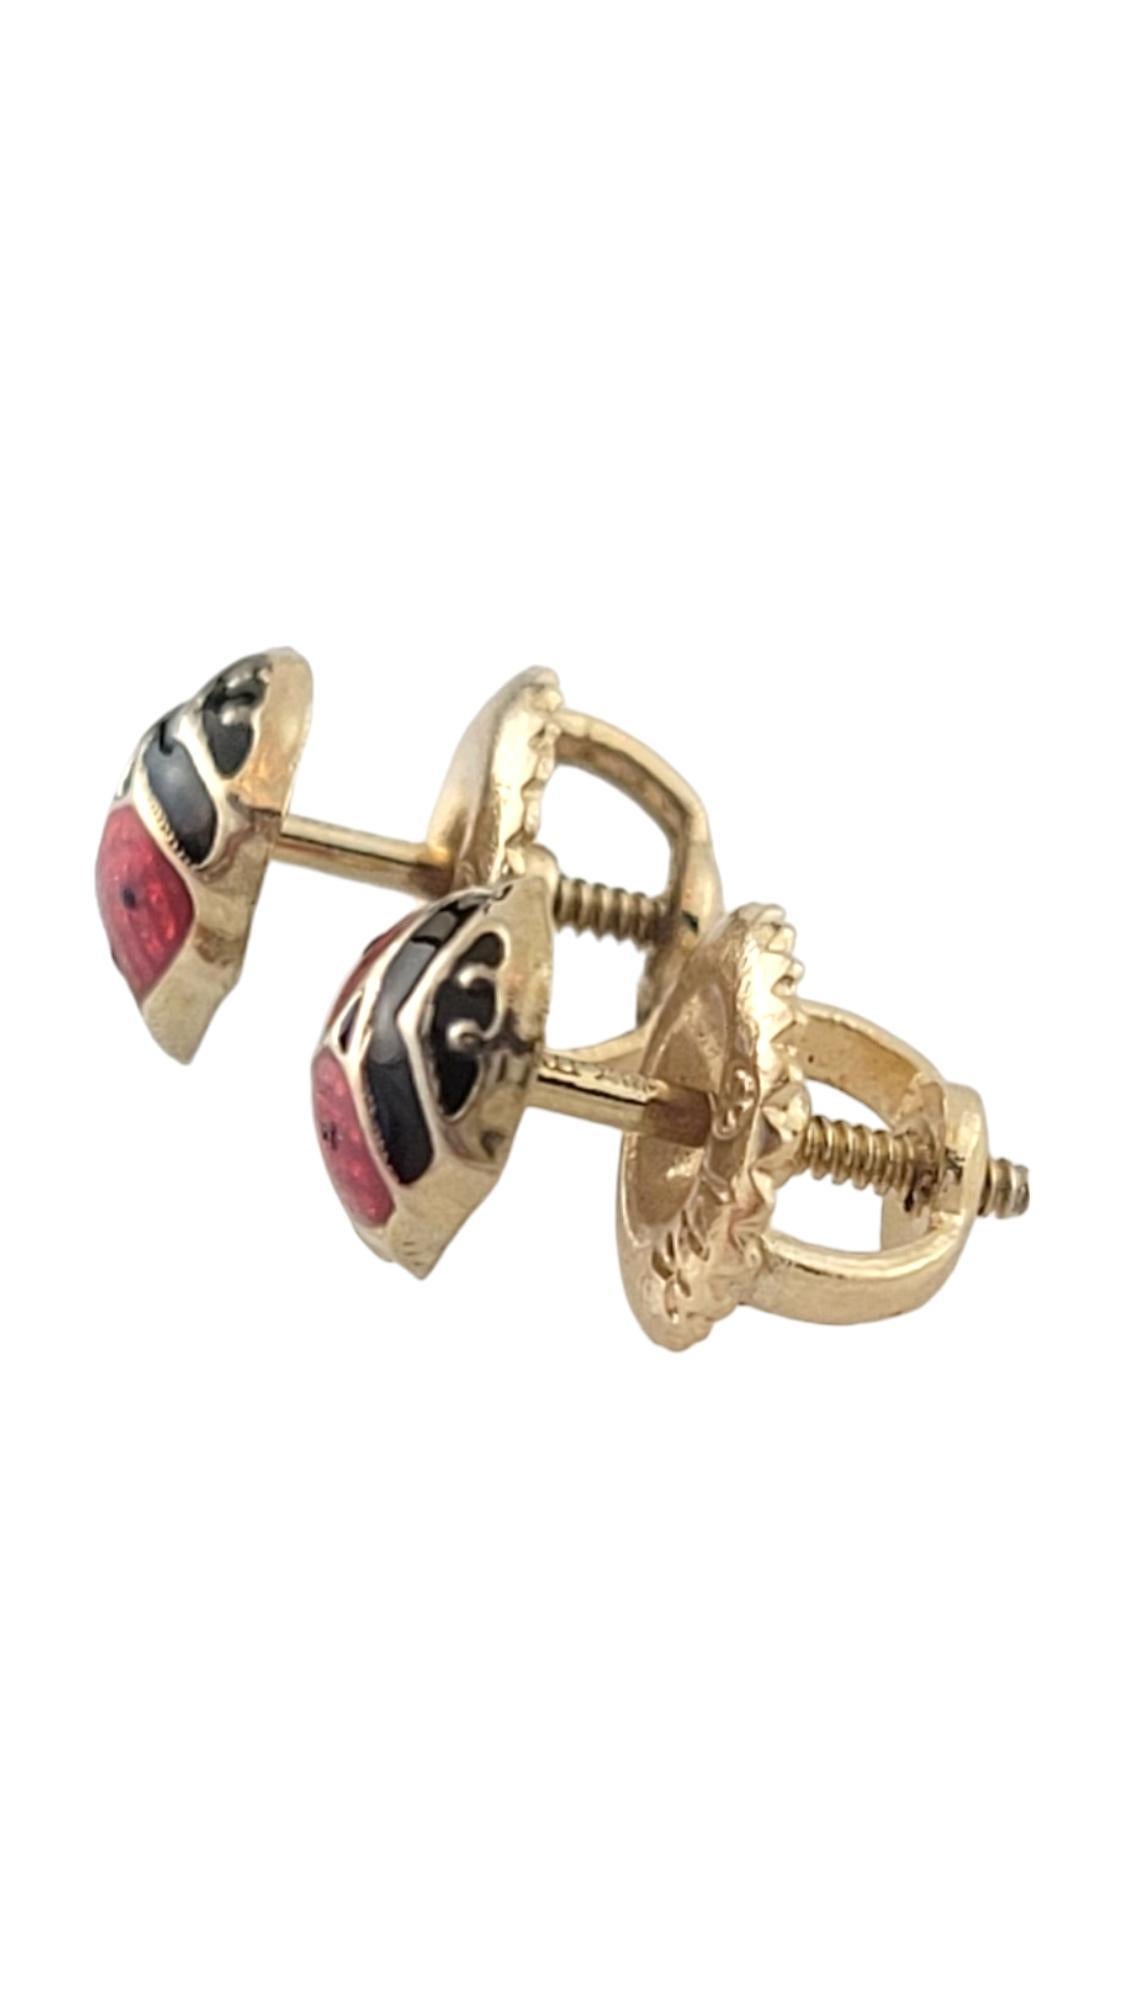 Vintage 14K Yellow Gold Laby Bug Screw Back Earrings

These adorable ladybug stud earrings are crafted from 14K yellow gold!

Size: 6.1mm X 5.0mm X 2.5mm

Weight: 0.2 dwt/ 0.4 g

Hallmark: 14K

Very good condition, professionally polished.

Will